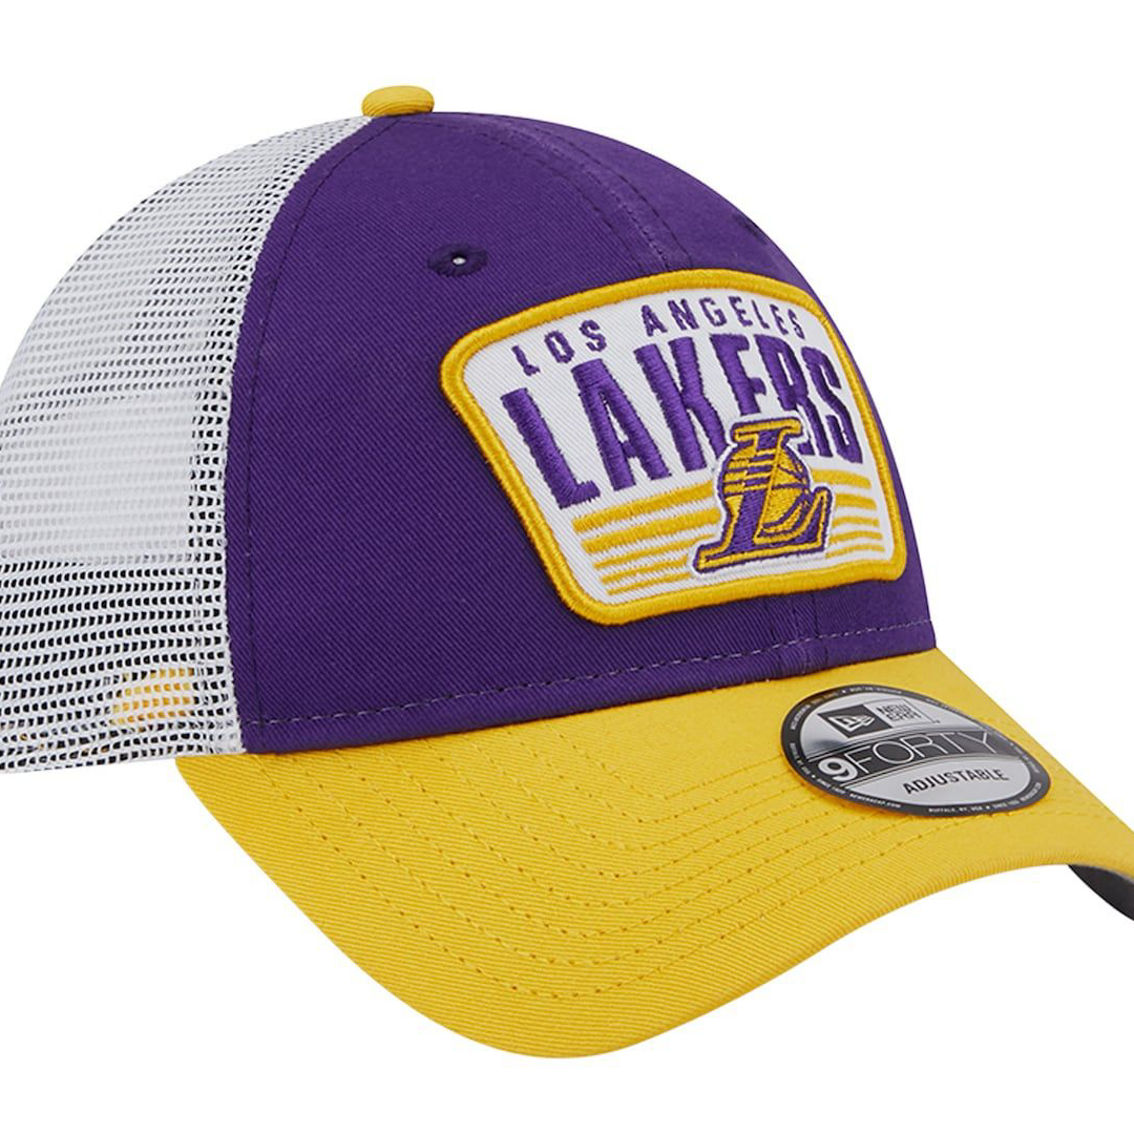 New Era Men's Purple/Gold Los Angeles Lakers Two-Tone Patch 9FORTY Trucker Snapback Hat - Image 4 of 4